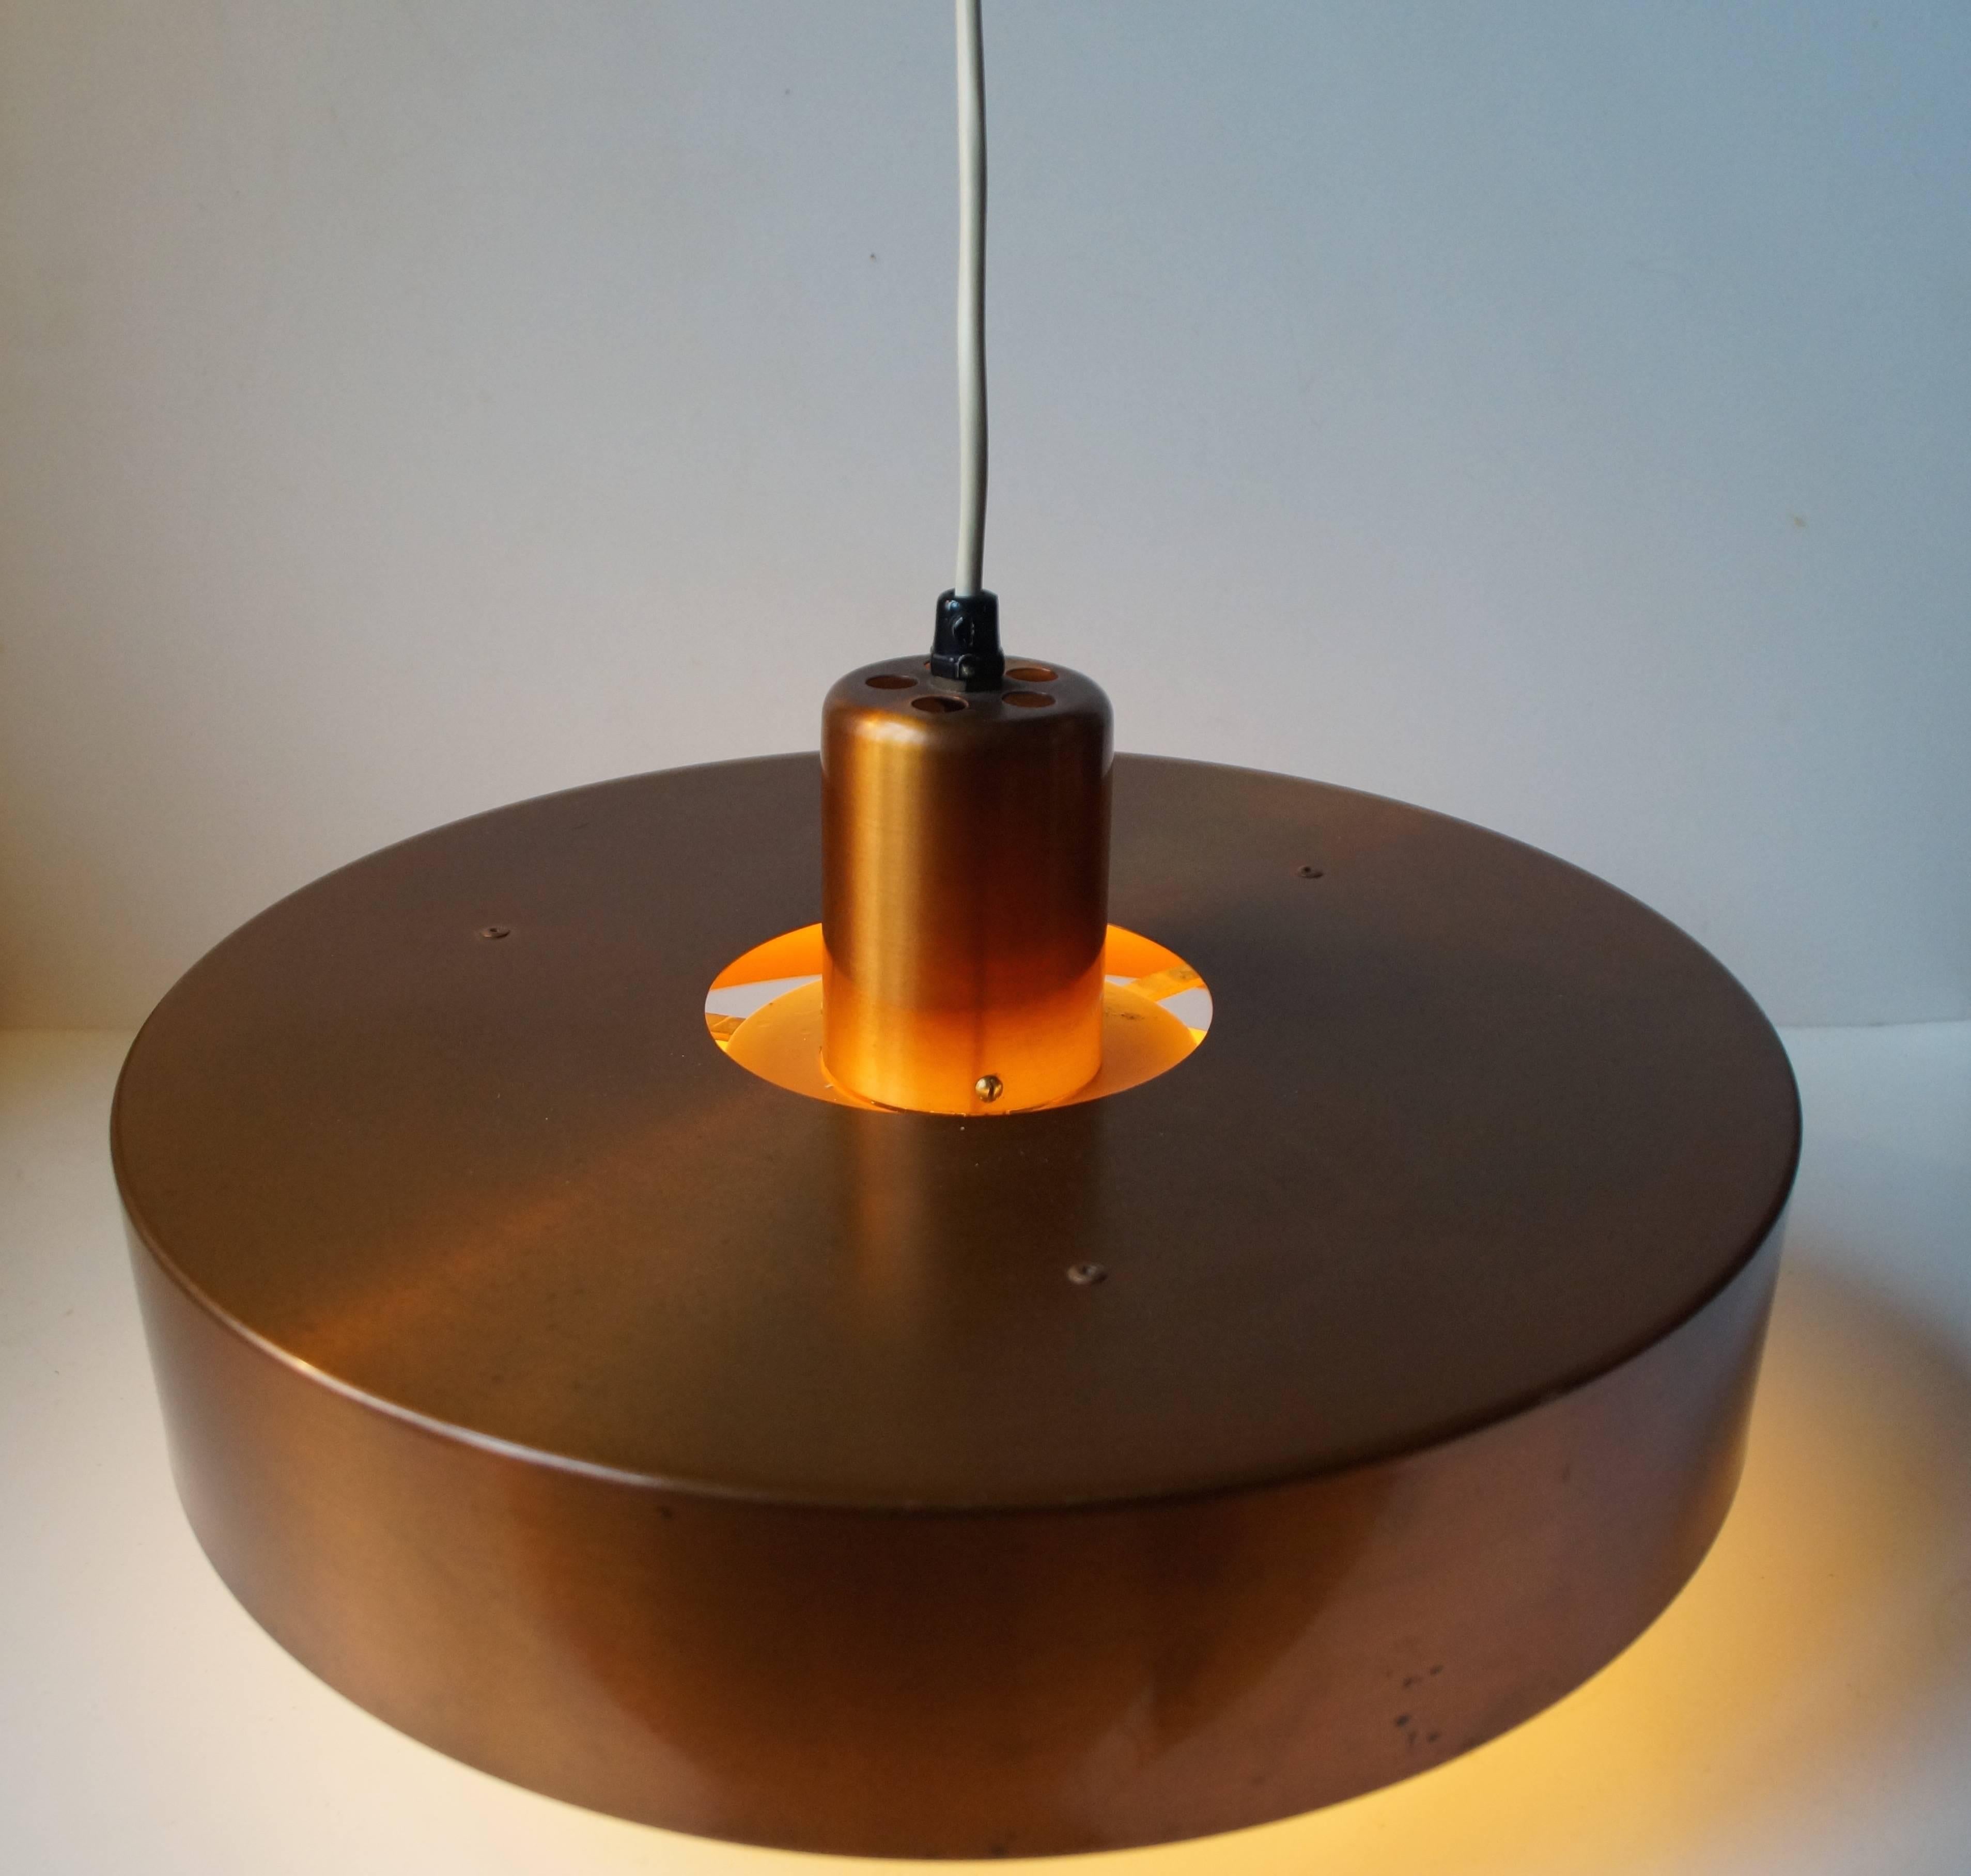 This solid copper pendant lamp was designed by Johannes Hammerborg for Fog & Mørup, Denmark and released as 'Roulet' in the early 1960s. It is one of Hammerborg earliest designs. Nice vintage condition with light ware and even patina to the